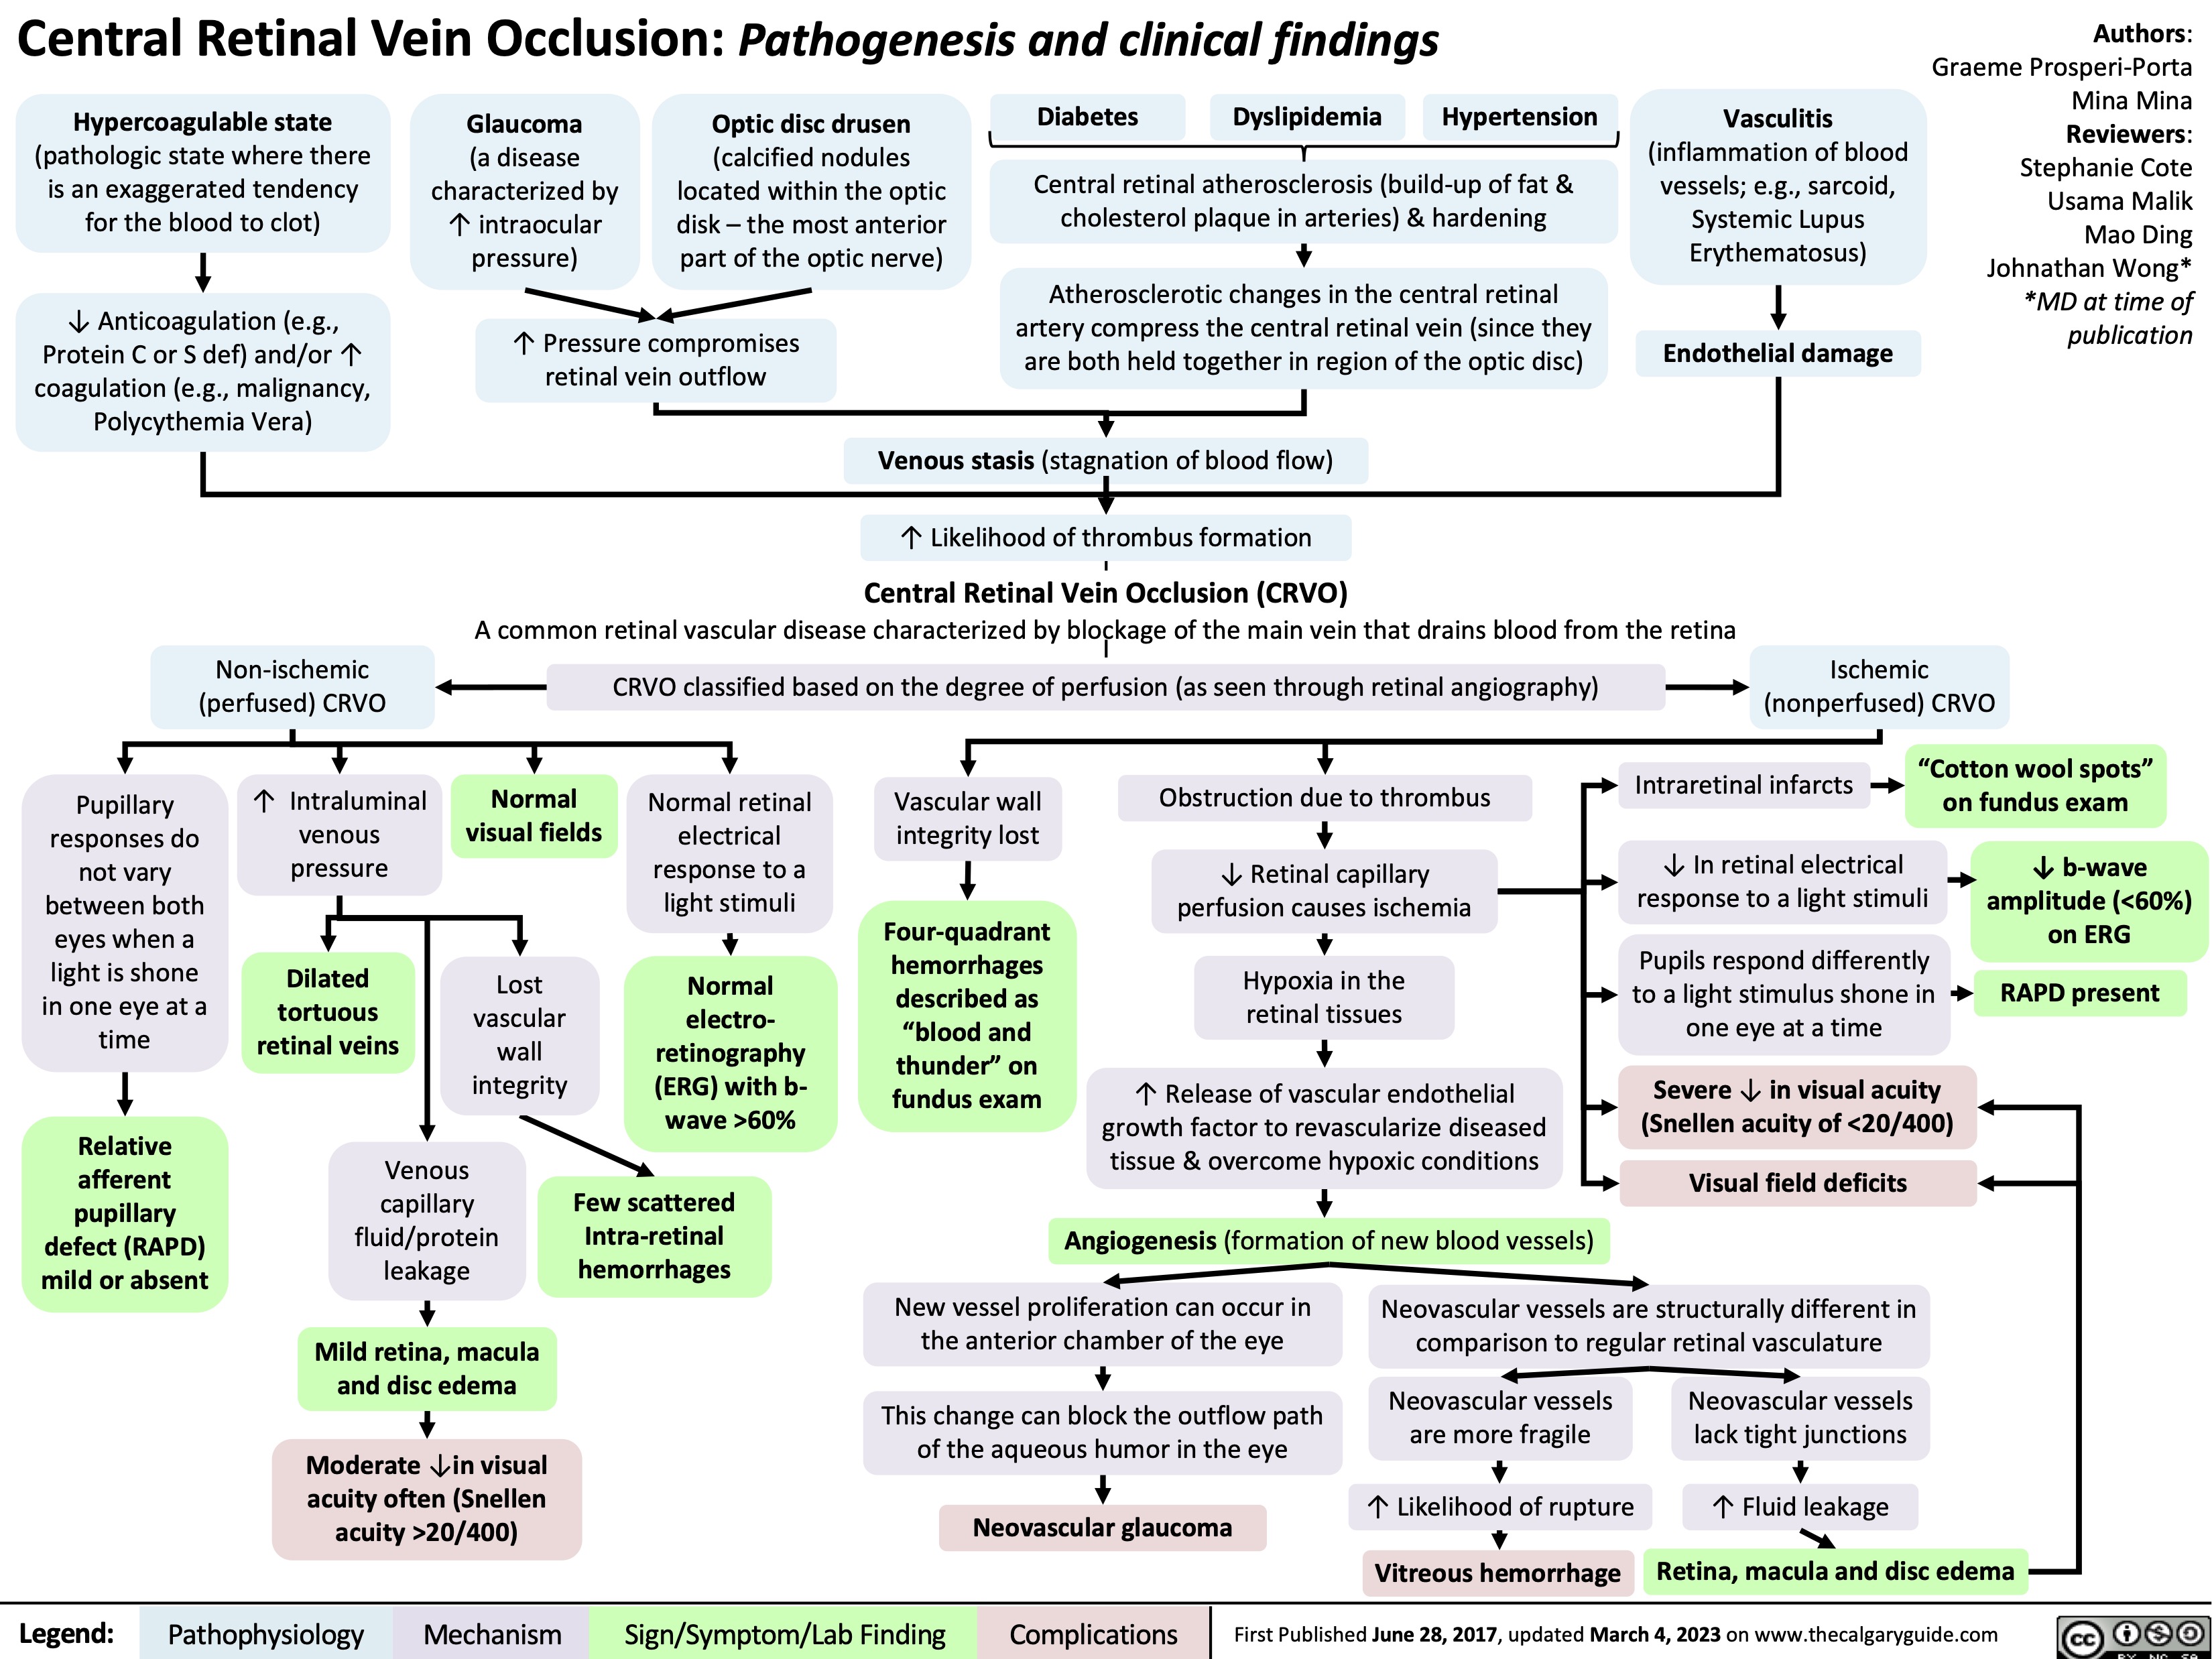 Central Retinal Vein Occlusion: Pathogenesis and clinical findings
Authors: Graeme Prosperi-Porta Mina Mina Reviewers: Stephanie Cote Usama Malik Mao Ding Johnathan Wong* *MD at time of publication
       Hypercoagulable state
(pathologic state where there is an exaggerated tendency for the blood to clot)
↓ Anticoagulation (e.g., Protein C or S def) and/or ↑ coagulation (e.g., malignancy, Polycythemia Vera)
Non-ischemic (perfused) CRVO
Glaucoma
(a disease characterized by ↑ intraocular pressure)
Optic disc drusen
(calcified nodules located within the optic disk – the most anterior part of the optic nerve)
Diabetes
Dyslipidemia
Hypertension
Vasculitis
(inflammation of blood vessels; e.g., sarcoid, Systemic Lupus Erythematosus)
Endothelial damage
       Pupillary responses do not vary between both eyes when a light is shone in one eye at a time
Relative afferent pupillary defect (RAPD) mild or absent
Lost vascular wall integrity
Normal retinal electrical response to a light stimuli
Normal
electro- retinography (ERG) with b- wave >60%
Few scattered Intra-retinal hemorrhages
↓ In retinal electrical response to a light stimuli
Pupils respond differently to a light stimulus shone in one eye at a time
Severe ↓ in visual acuity (Snellen acuity of <20/400)
Visual field deficits
↓ b-wave amplitude (<60%) on ERG
RAPD present
↑ Pressure compromises retinal vein outflow
Central retinal atherosclerosis (build-up of fat & cholesterol plaque in arteries) & hardening
Atherosclerotic changes in the central retinal artery compress the central retinal vein (since they are both held together in region of the optic disc)
Venous stasis (stagnation of blood flow) ↑ Likelihood of thrombus formation
Central Retinal Vein Occlusion (CRVO)
      A common retinal vascular disease characterized by blockage of the main vein that drains blood from the retina
CRVO classified based on the degree of perfusion (as seen through retinal angiography)
Ischemic (nonperfused) CRVO
              ↑ Intraluminal venous pressure
Dilated tortuous retinal veins
Normal visual fields
Vascular wall integrity lost
Four-quadrant hemorrhages described as “blood and thunder” on fundus exam
Obstruction due to thrombus
↓ Retinal capillary perfusion causes ischemia
Hypoxia in the retinal tissues
↑ Release of vascular endothelial growth factor to revascularize diseased tissue & overcome hypoxic conditions
Angiogenesis (formation of new blood vessels)
Intraretinal infarcts
“Cotton wool spots” on fundus exam
                 Venous capillary fluid/protein leakage
Mild retina, macula and disc edema
Moderate ↓in visual acuity often (Snellen acuity >20/400)
New vessel proliferation can occur in the anterior chamber of the eye
This change can block the outflow path of the aqueous humor in the eye
Neovascular glaucoma
Neovascular vessels are structurally different in comparison to regular retinal vasculature
          Neovascular vessels are more fragile
↑ Likelihood of rupture Vitreous hemorrhage
Neovascular vessels lack tight junctions
    ↑ Fluid leakage
Retina, macula and disc edema
    Legend:
 Pathophysiology
Mechanism
Sign/Symptom/Lab Finding
 Complications
 First Published June 28, 2017, updated March 4, 2023 on www.thecalgaryguide.com
   